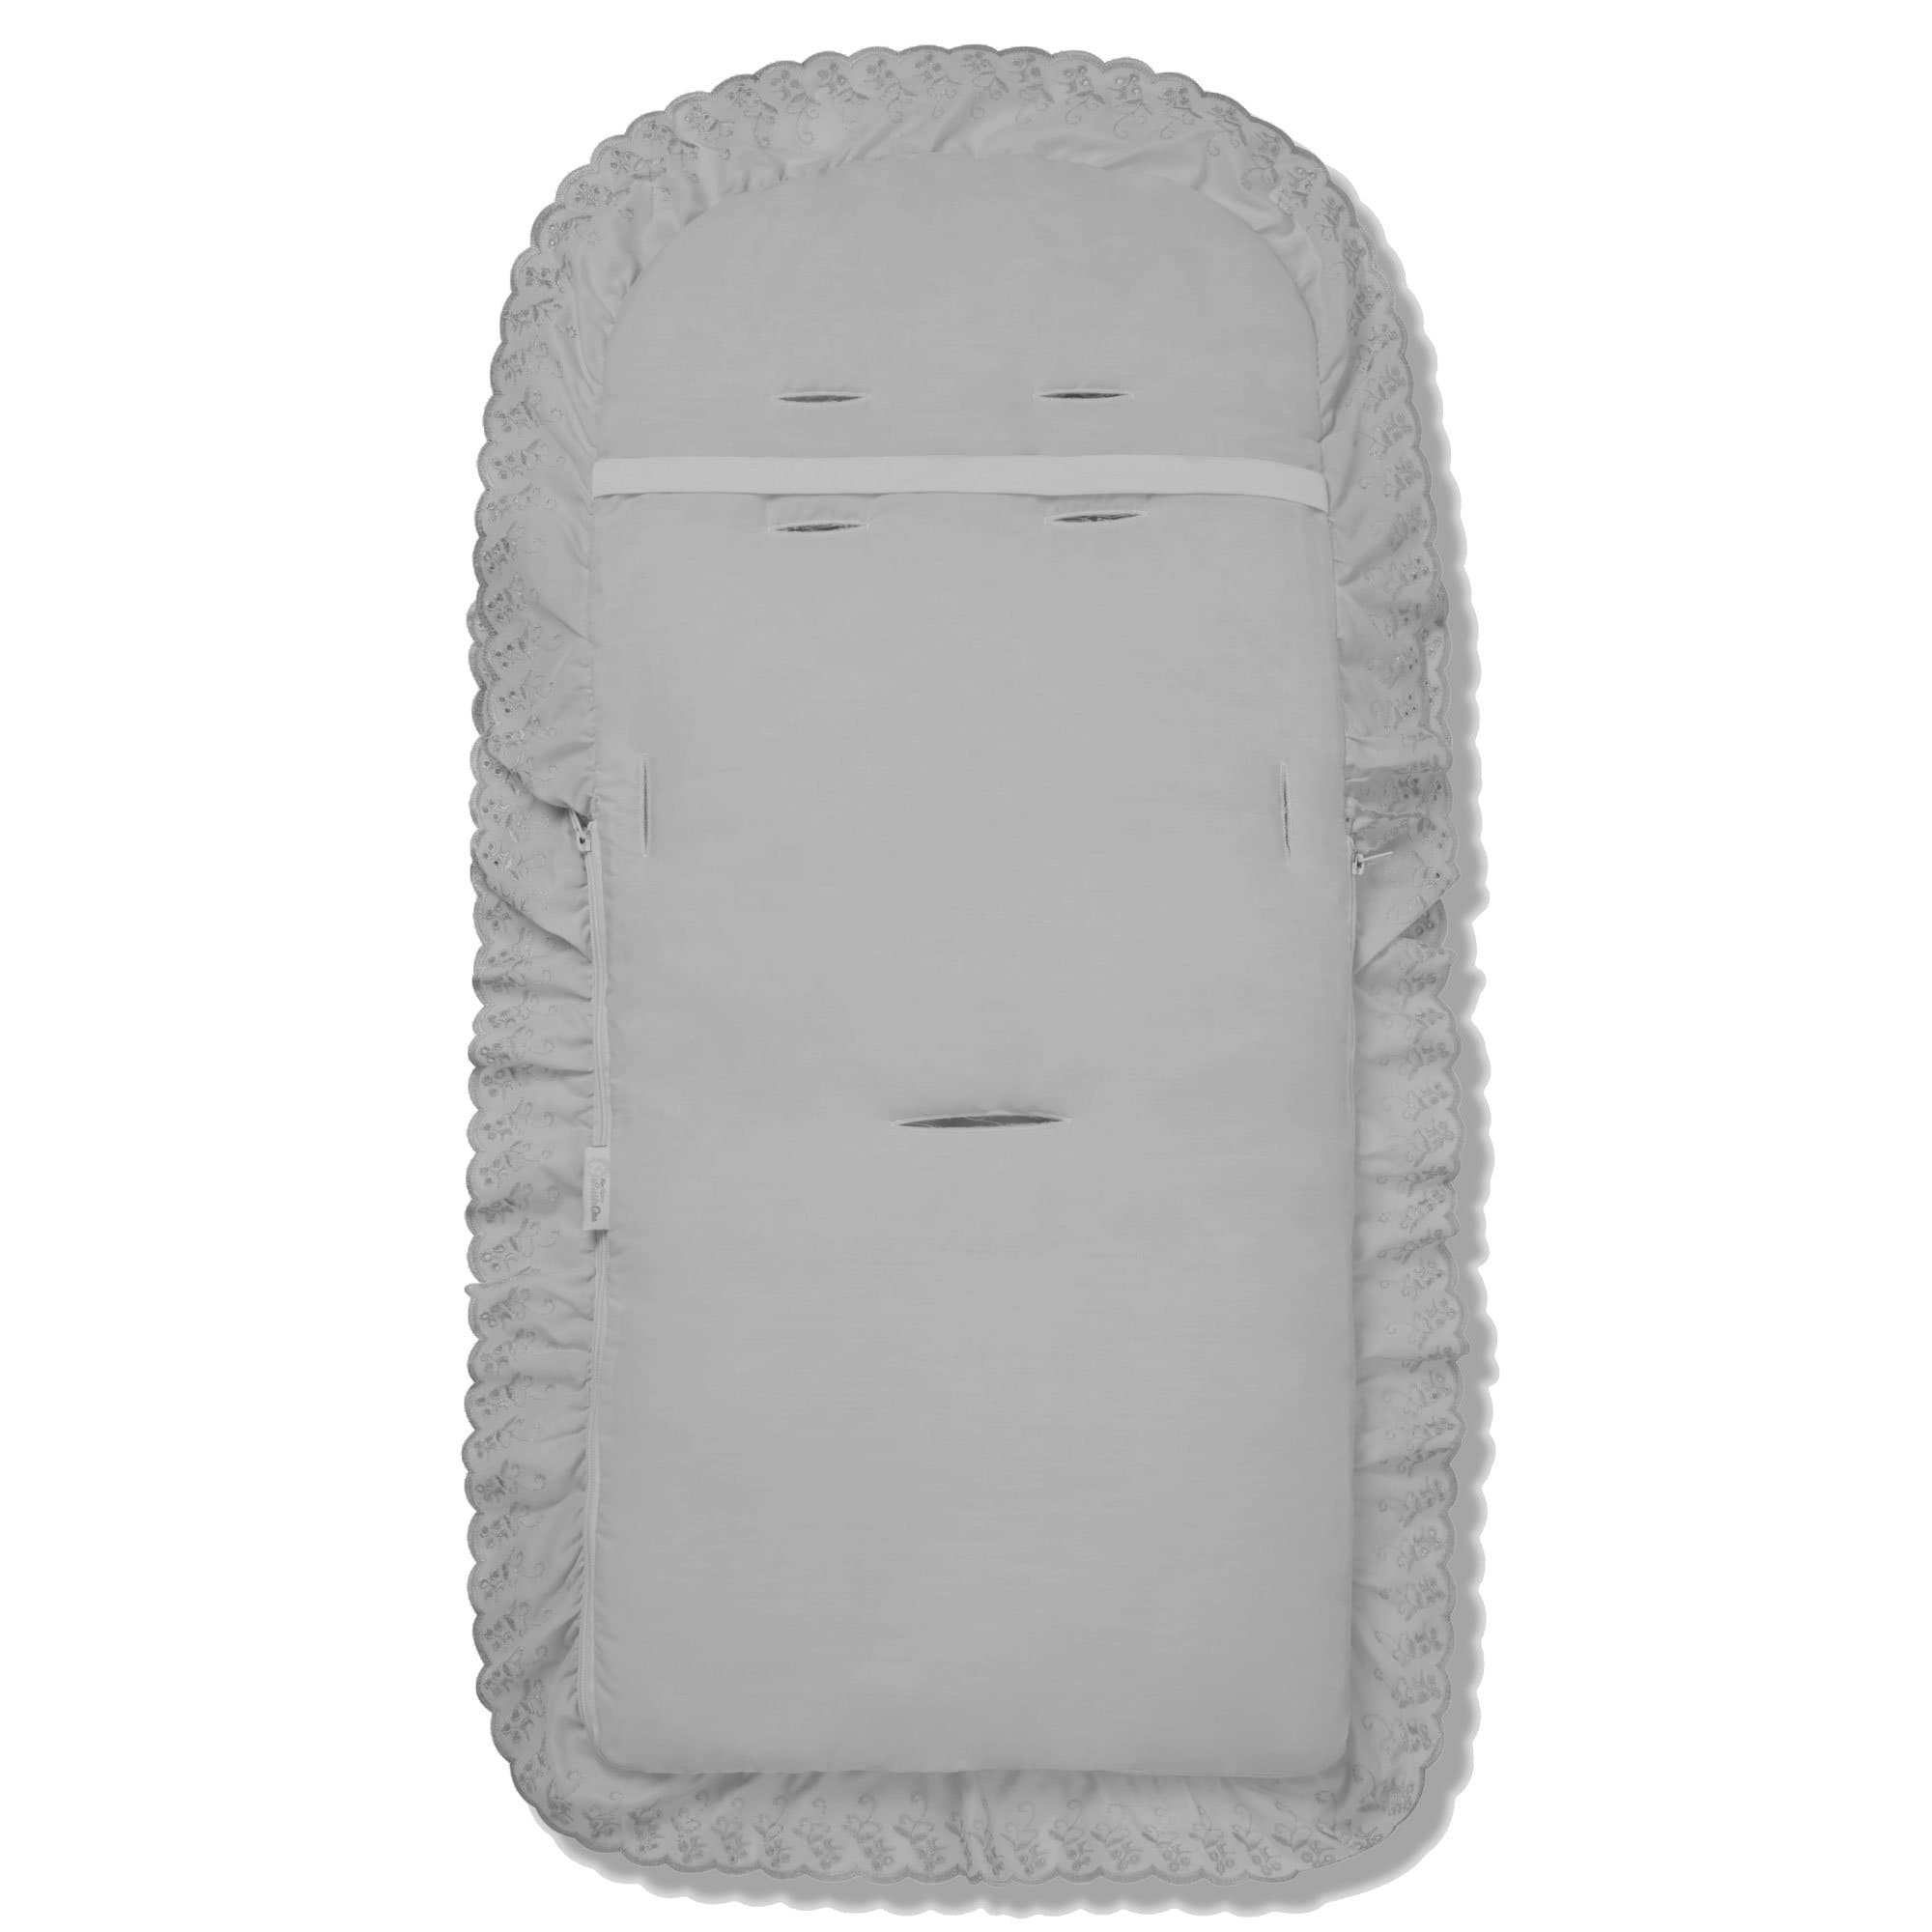 Broderie Anglaise Footmuff / Cosy Toes Compatible with I'coo -  | For Your Little One